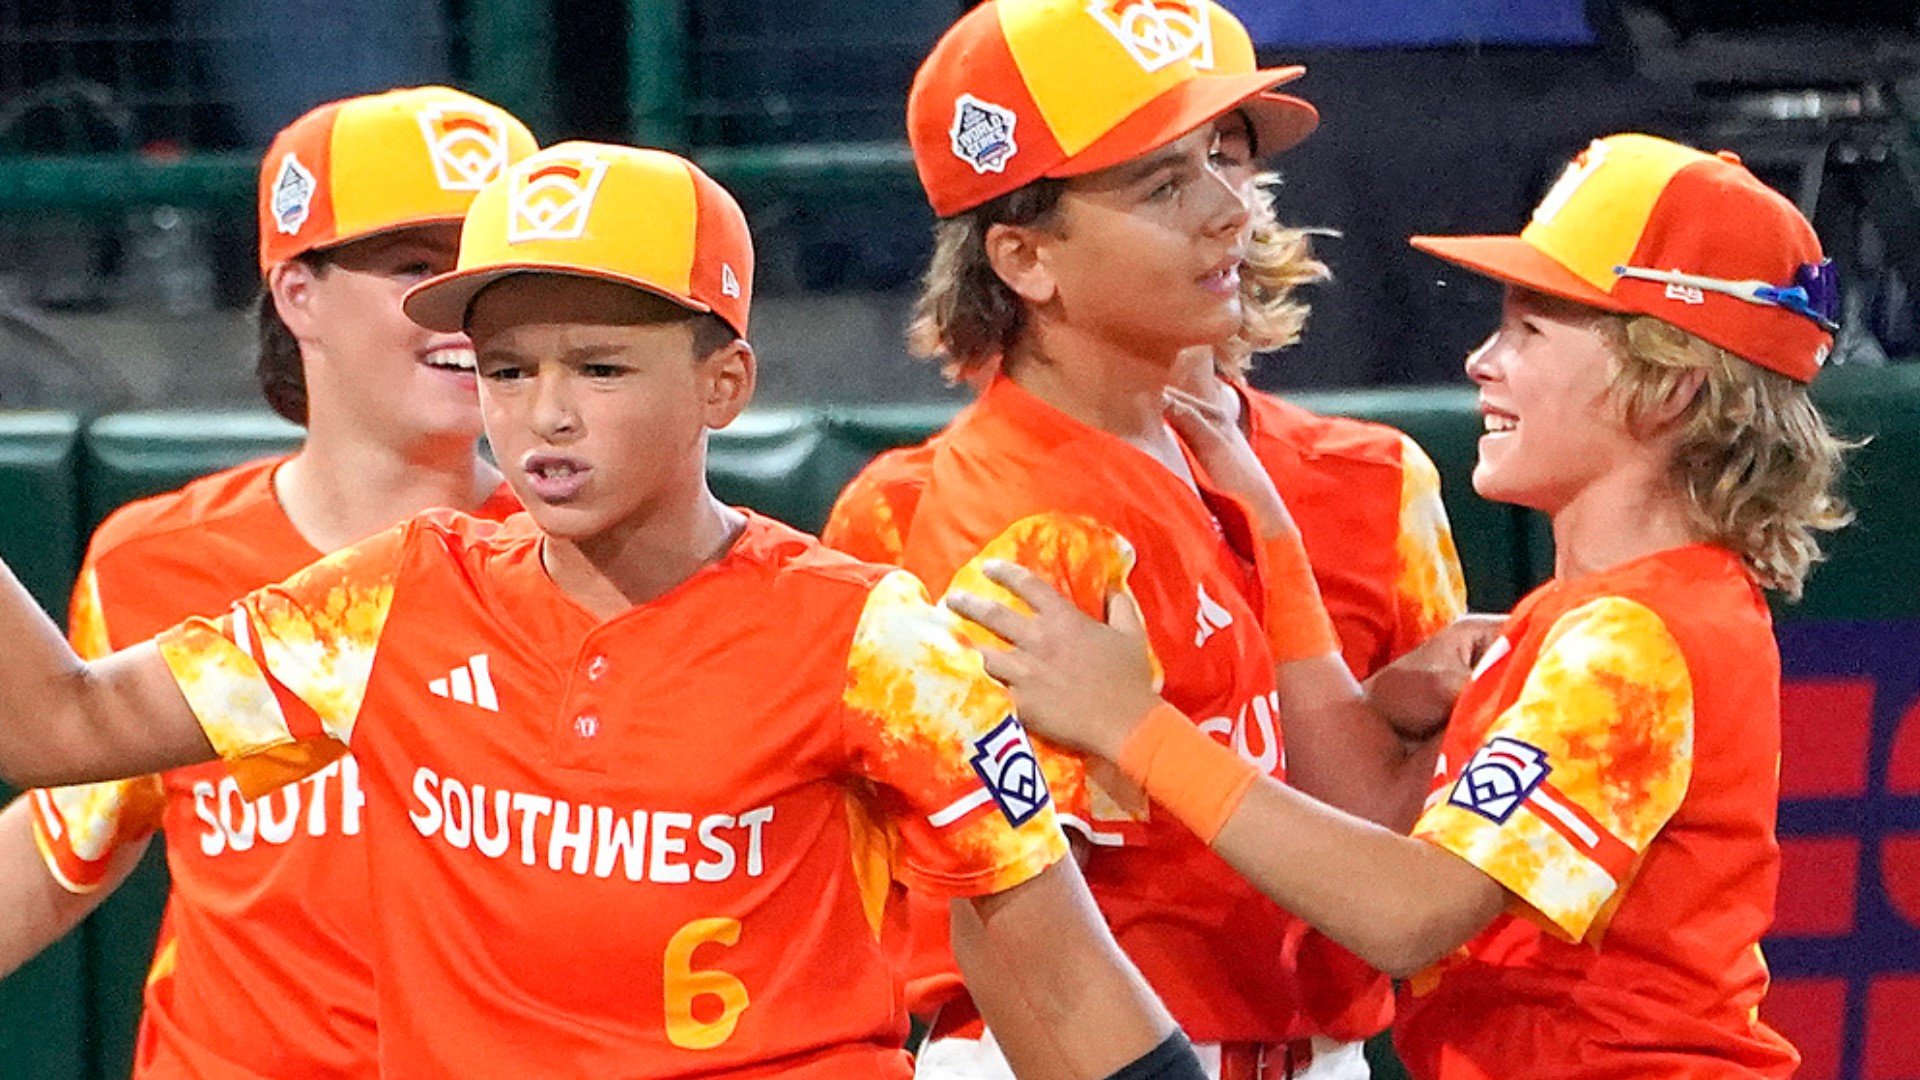 The Needville Little Leaguers from Texas needed nine innings to defeat the Seattle team. They'll face the winner of tomorrow's game on Saturday.